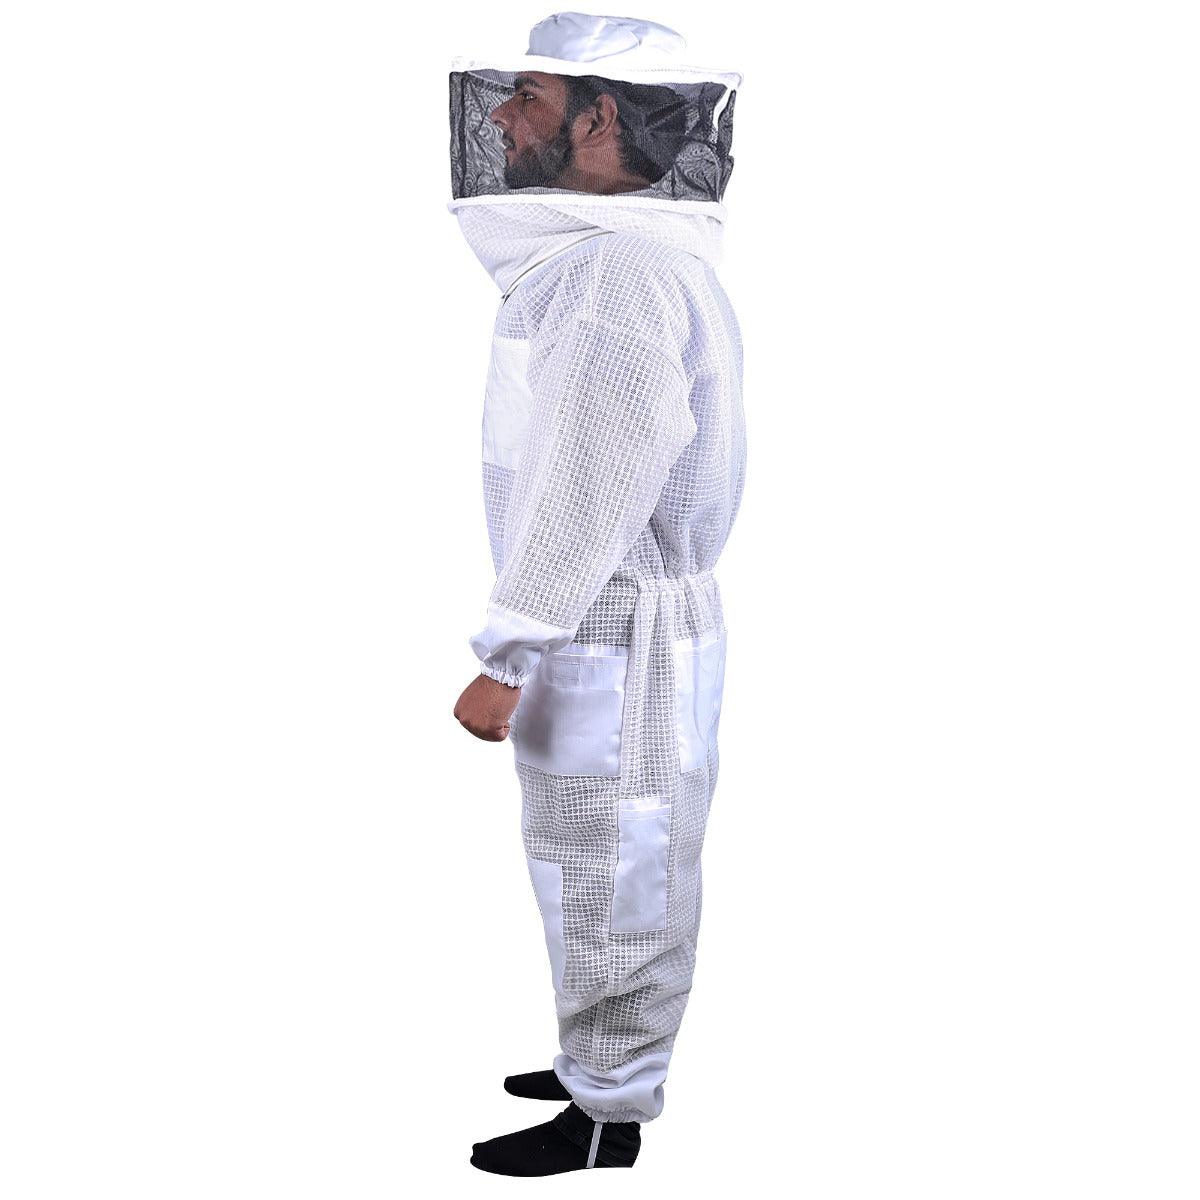 Beekeeping Bee Full Suit 3 Layer Mesh Ultra Cool Ventilated Round Head Beekeeping Protective Gear SIZE XL